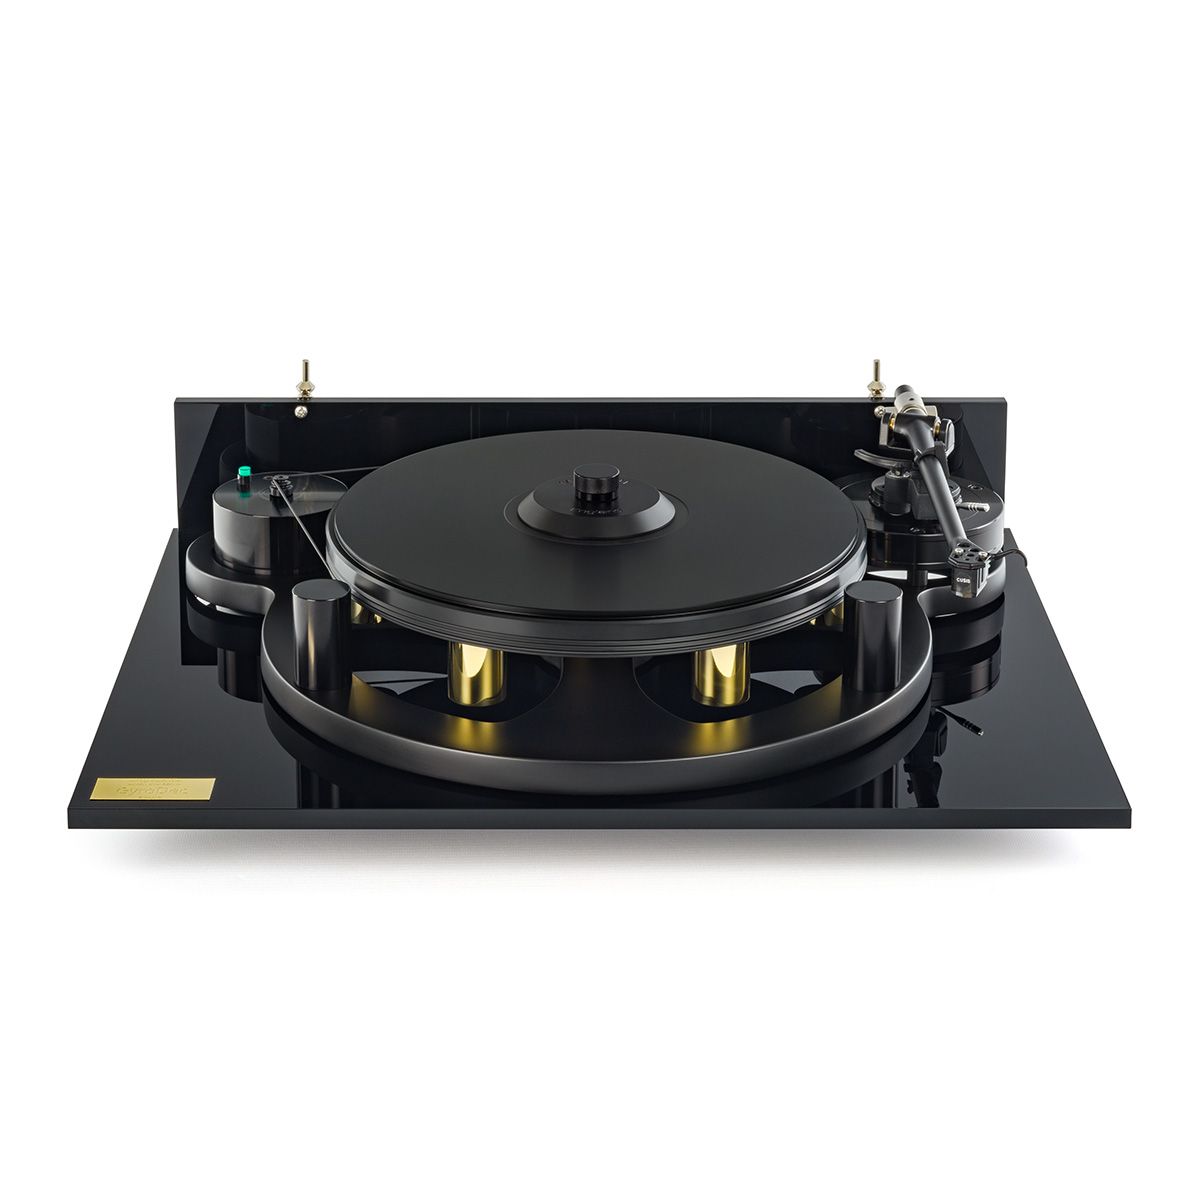 Michell Gyrodec Turntable in black - top view